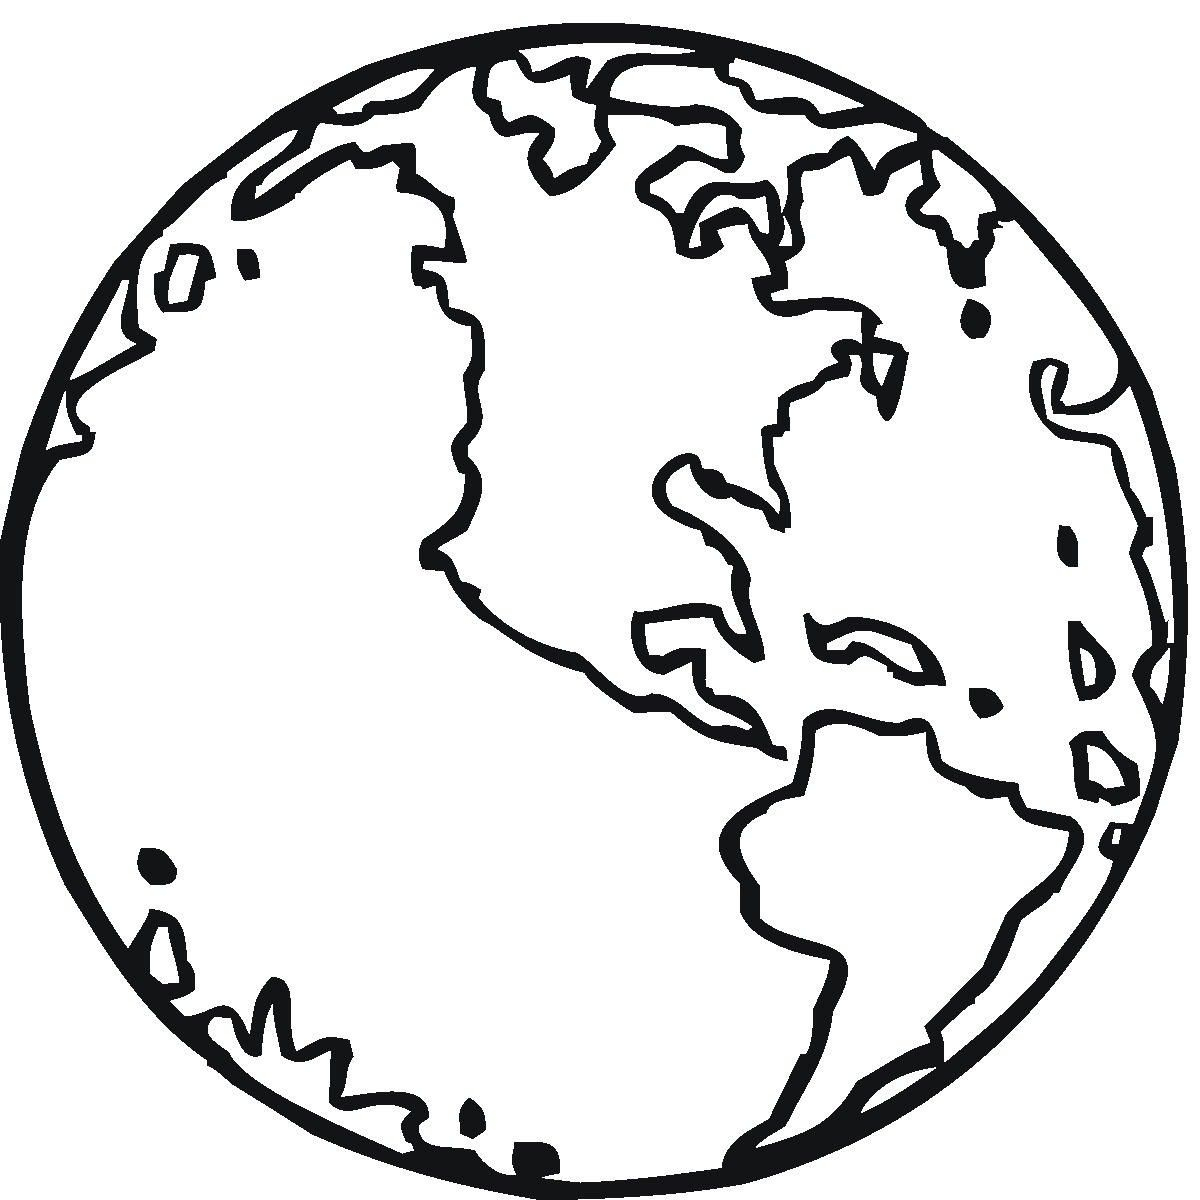 Free Printable Earth Coloring Pages For Kids | Stuff | Pinterest - Earth Coloring Pages Free Printable